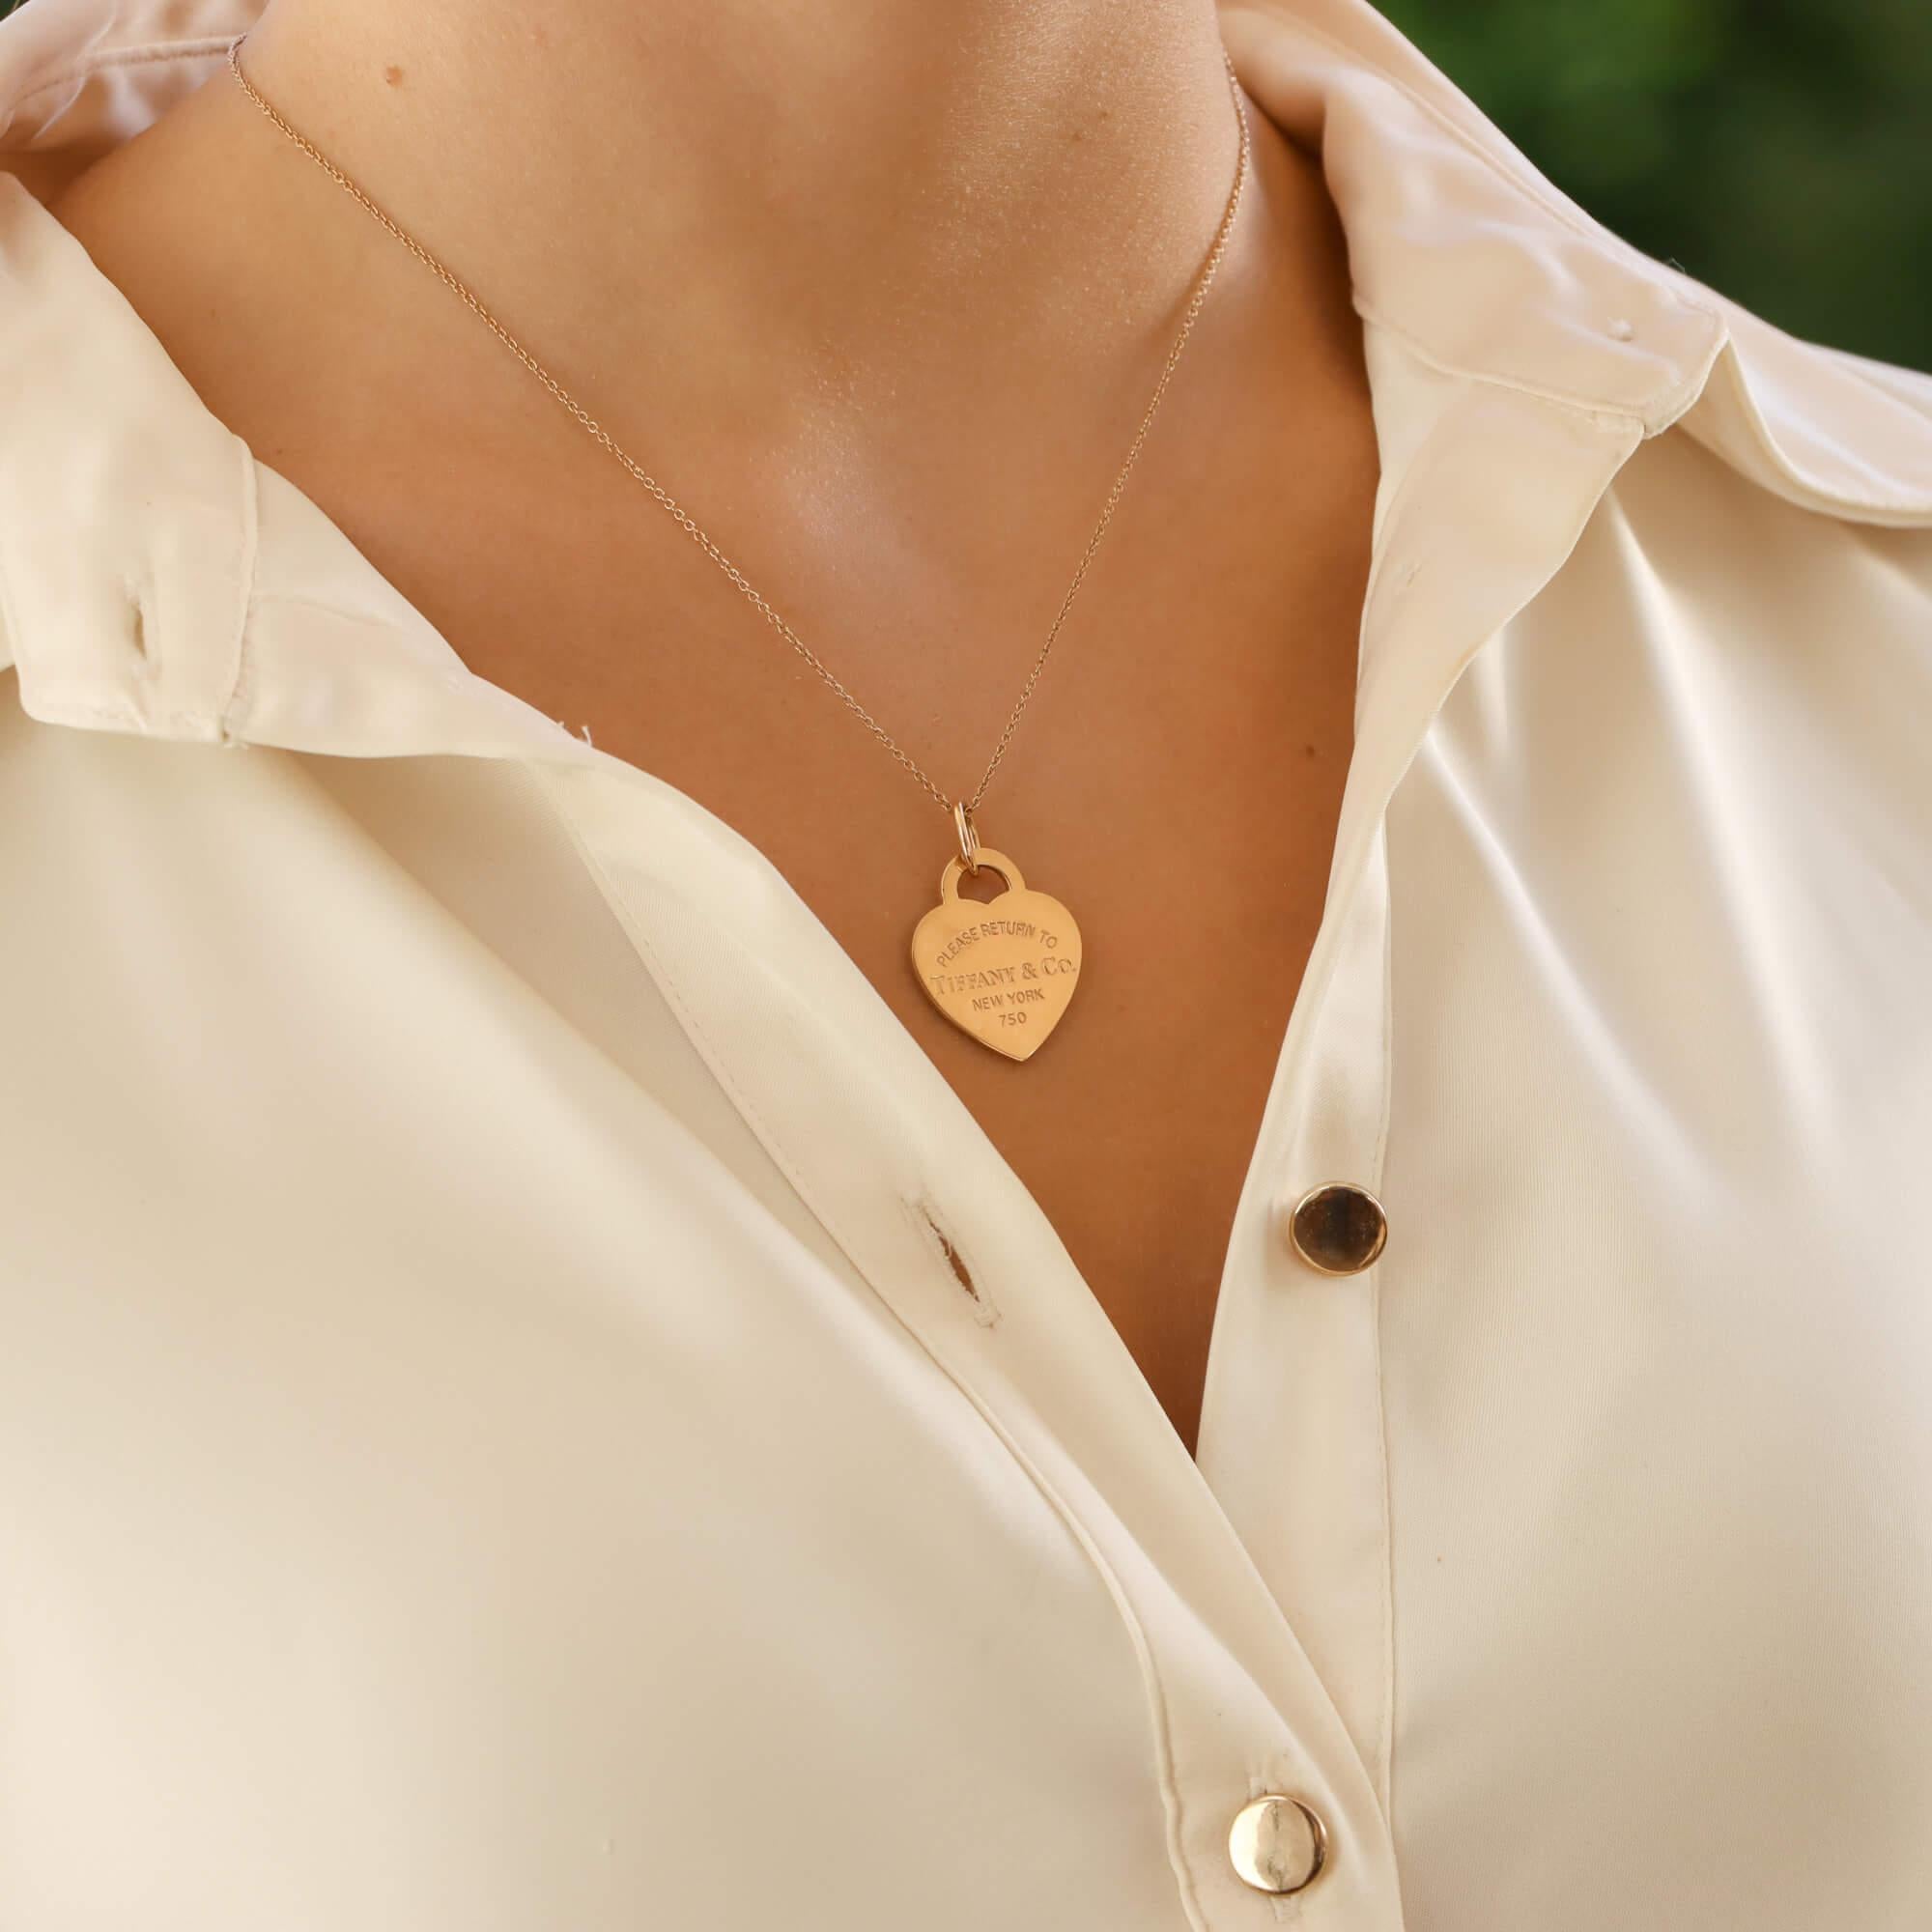 A beautiful vintage ‘Return to Tiffany & Co.’ heart tag charm pendant set in 18k rose gold.

From the iconic Return to Tiffany collection, the pendant depicts a heart motif. The heart is engraved to the front with ‘Please Return to Tiffany & Co. New